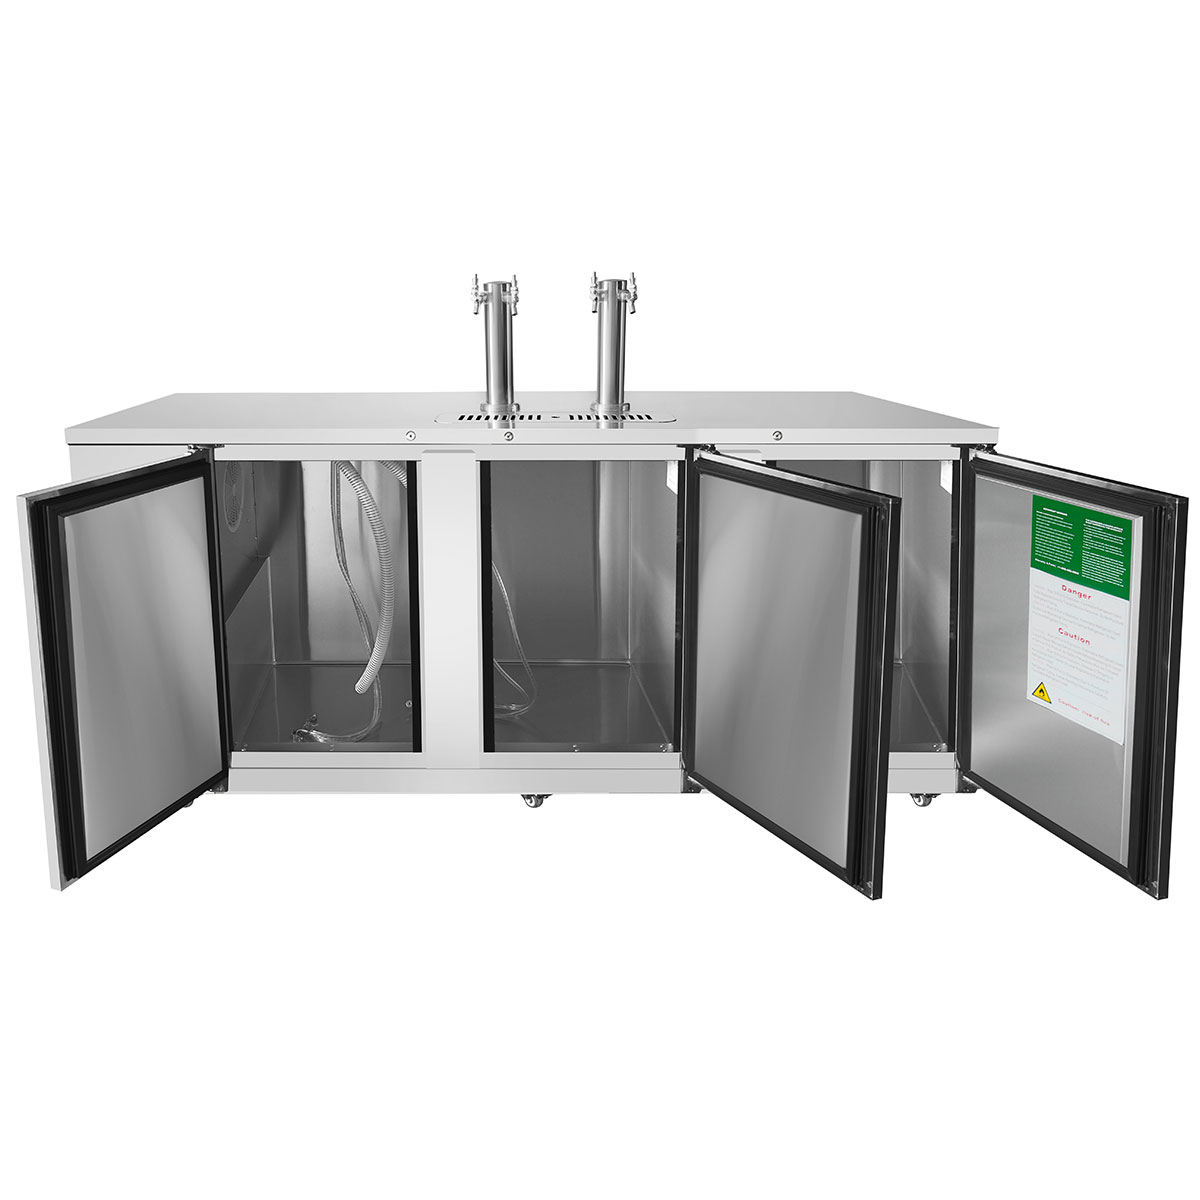 ATOSA MKC90GR Keg Coolers STAINLESS STEEL FINISH WITH WHEELS FOR COMMERCIAL BAR RESTAURANT 